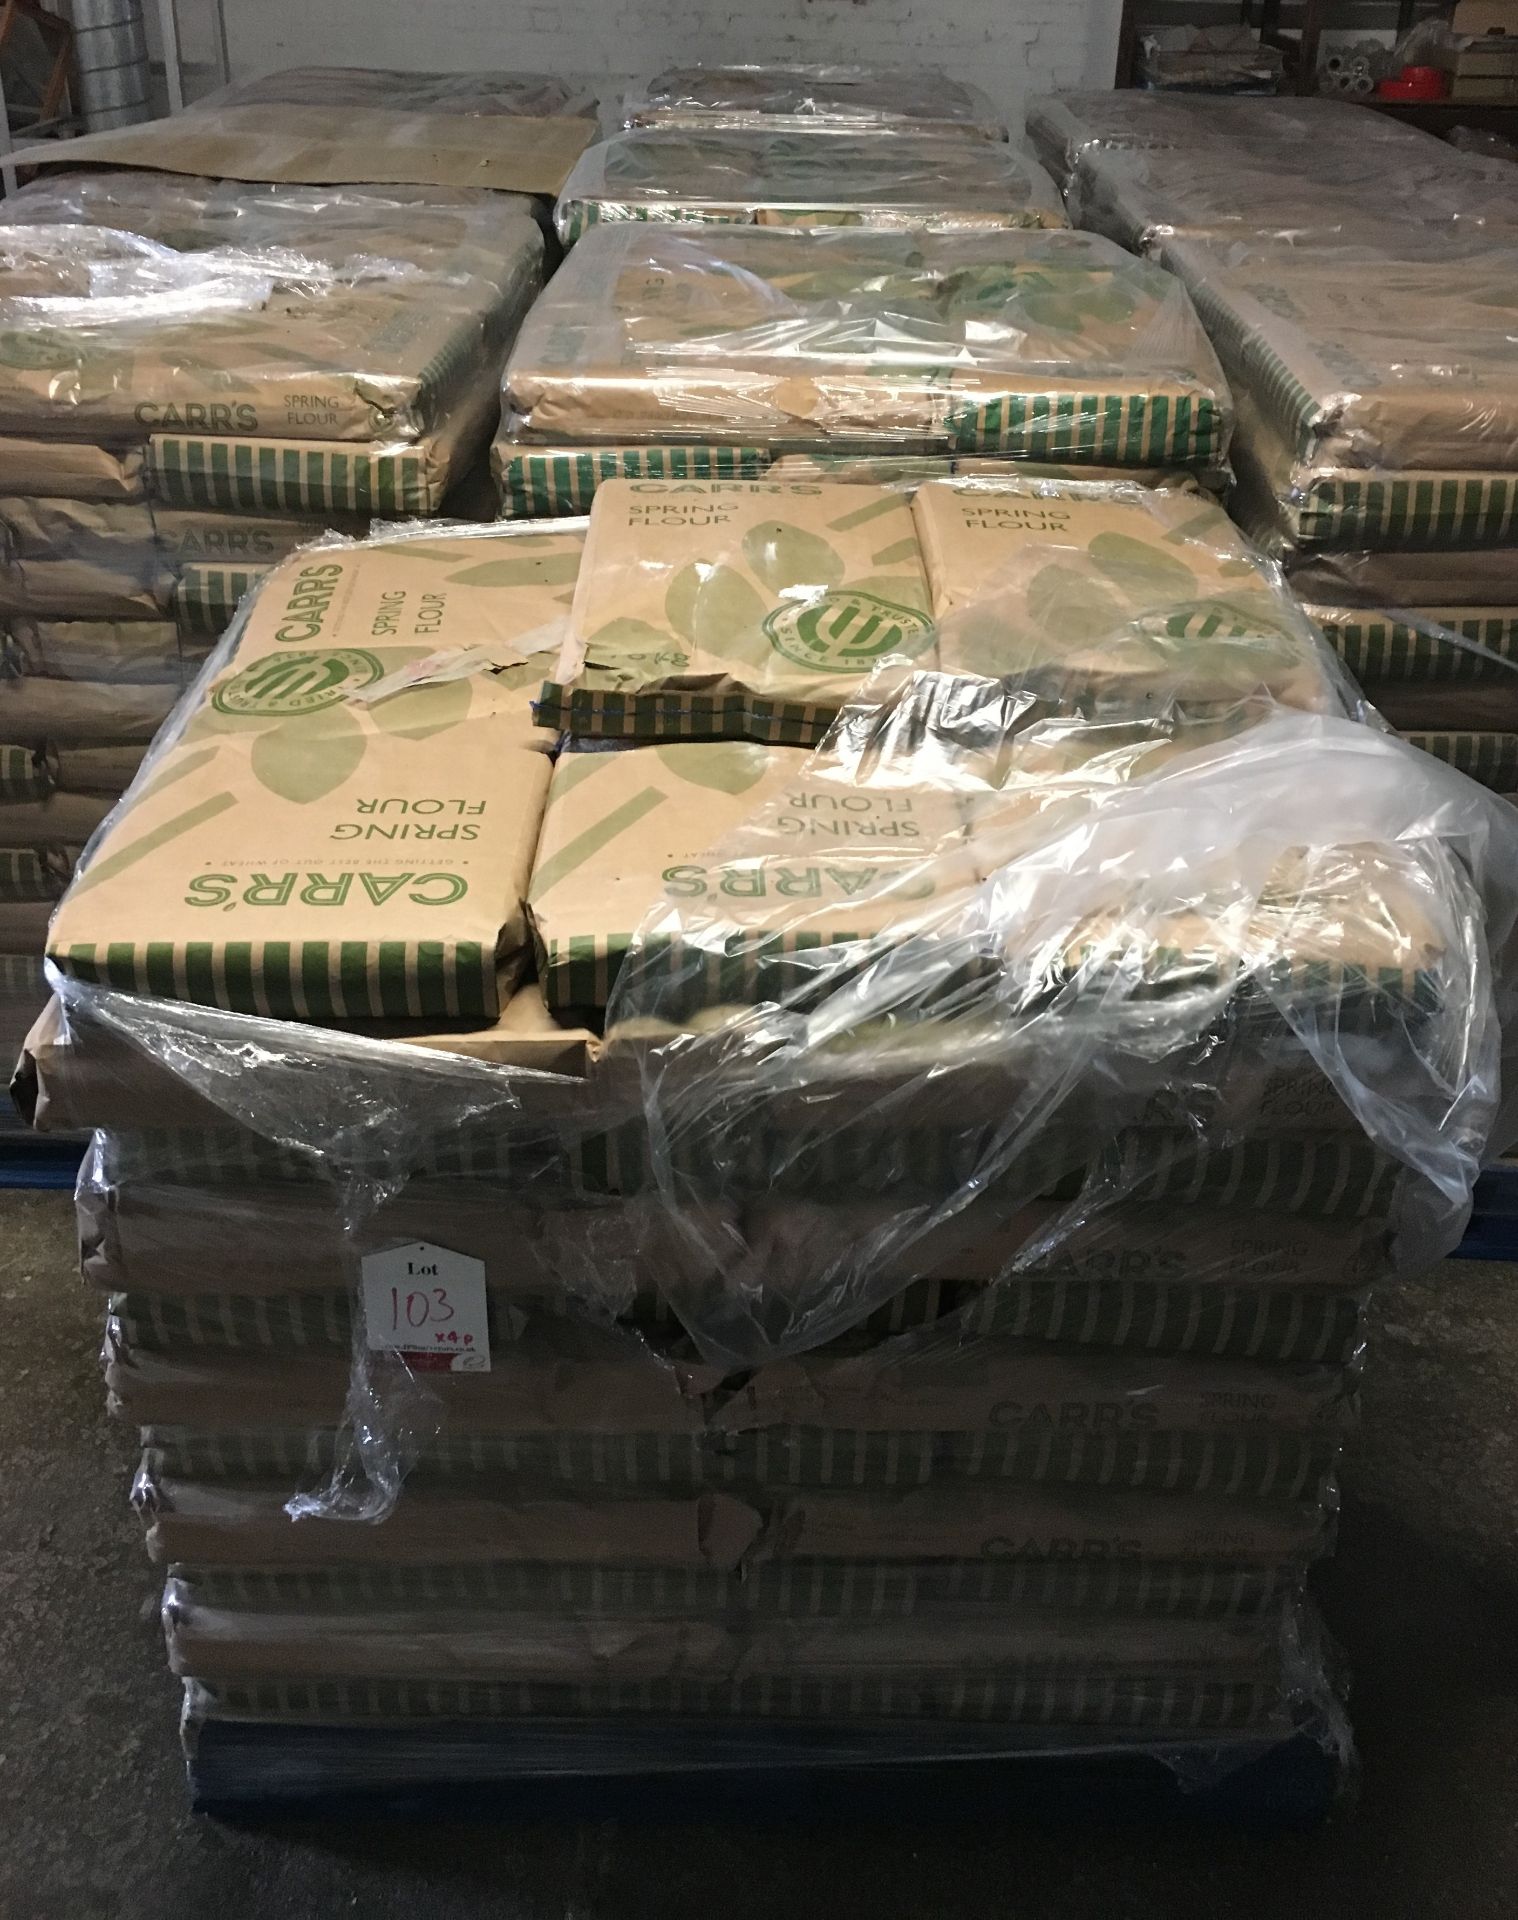 4 x Pallets of Carrs Spring Flour - Approximately 65 Bags per Pallet - Image 2 of 4